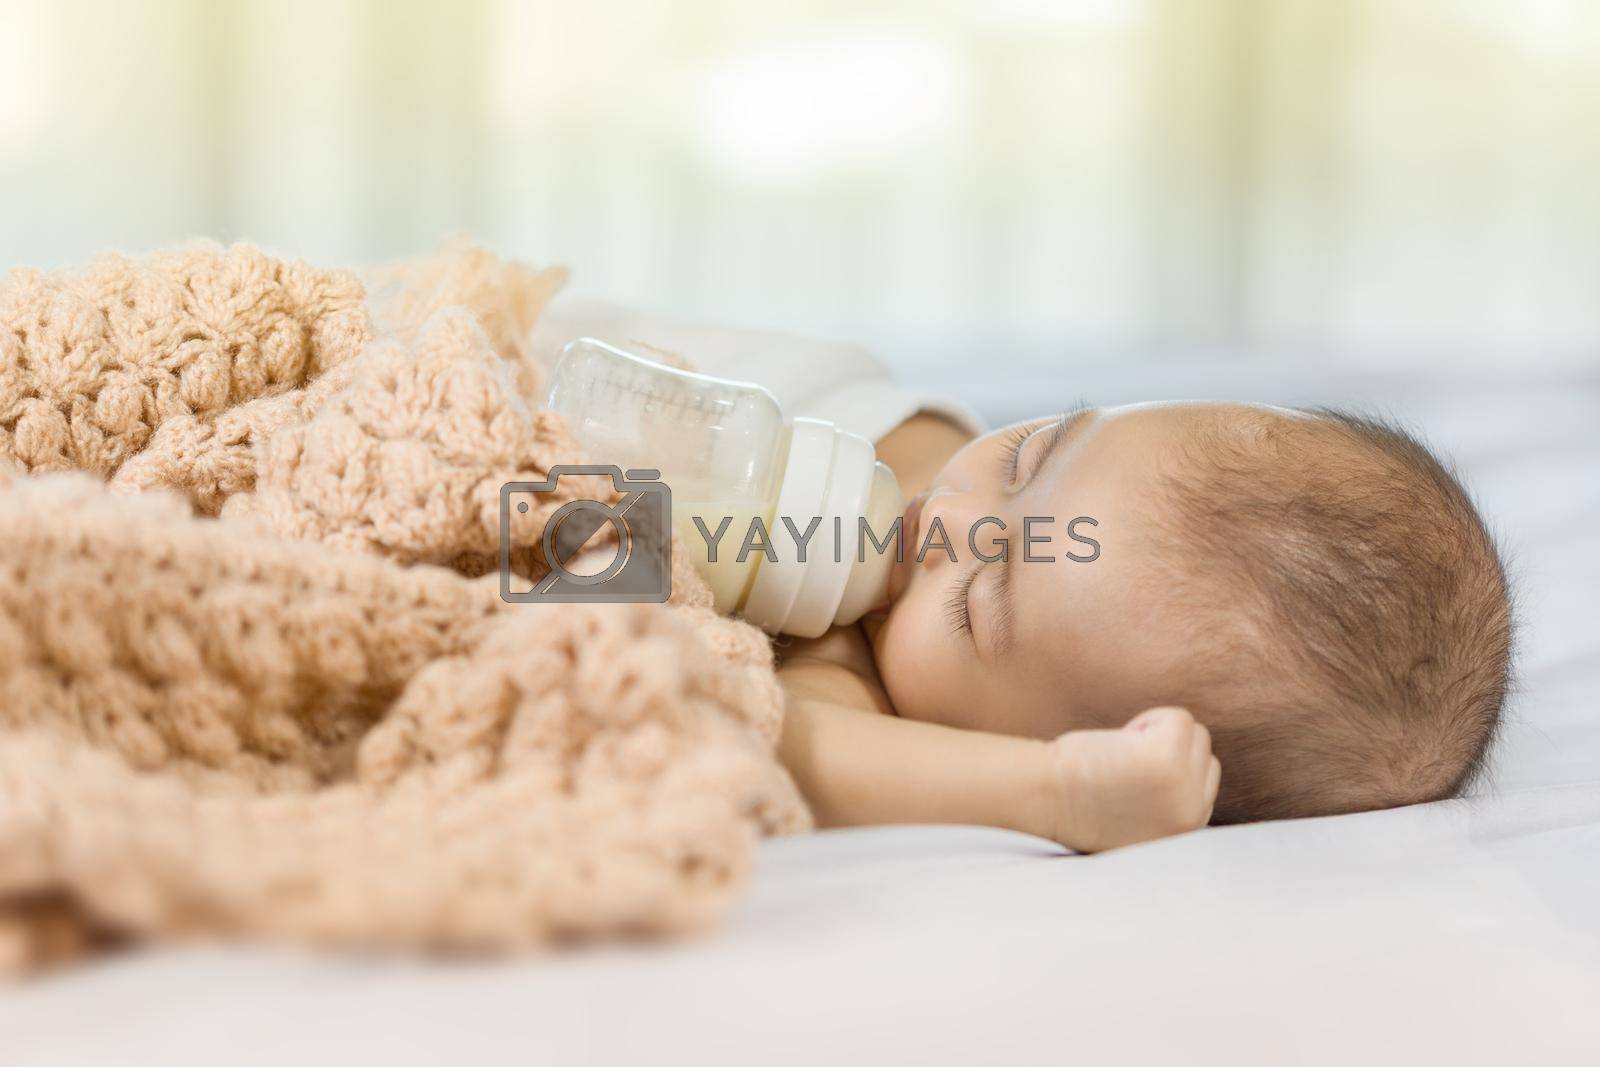 Royalty free image of baby drinking milk from bottle and sleeping on bed by geargodz